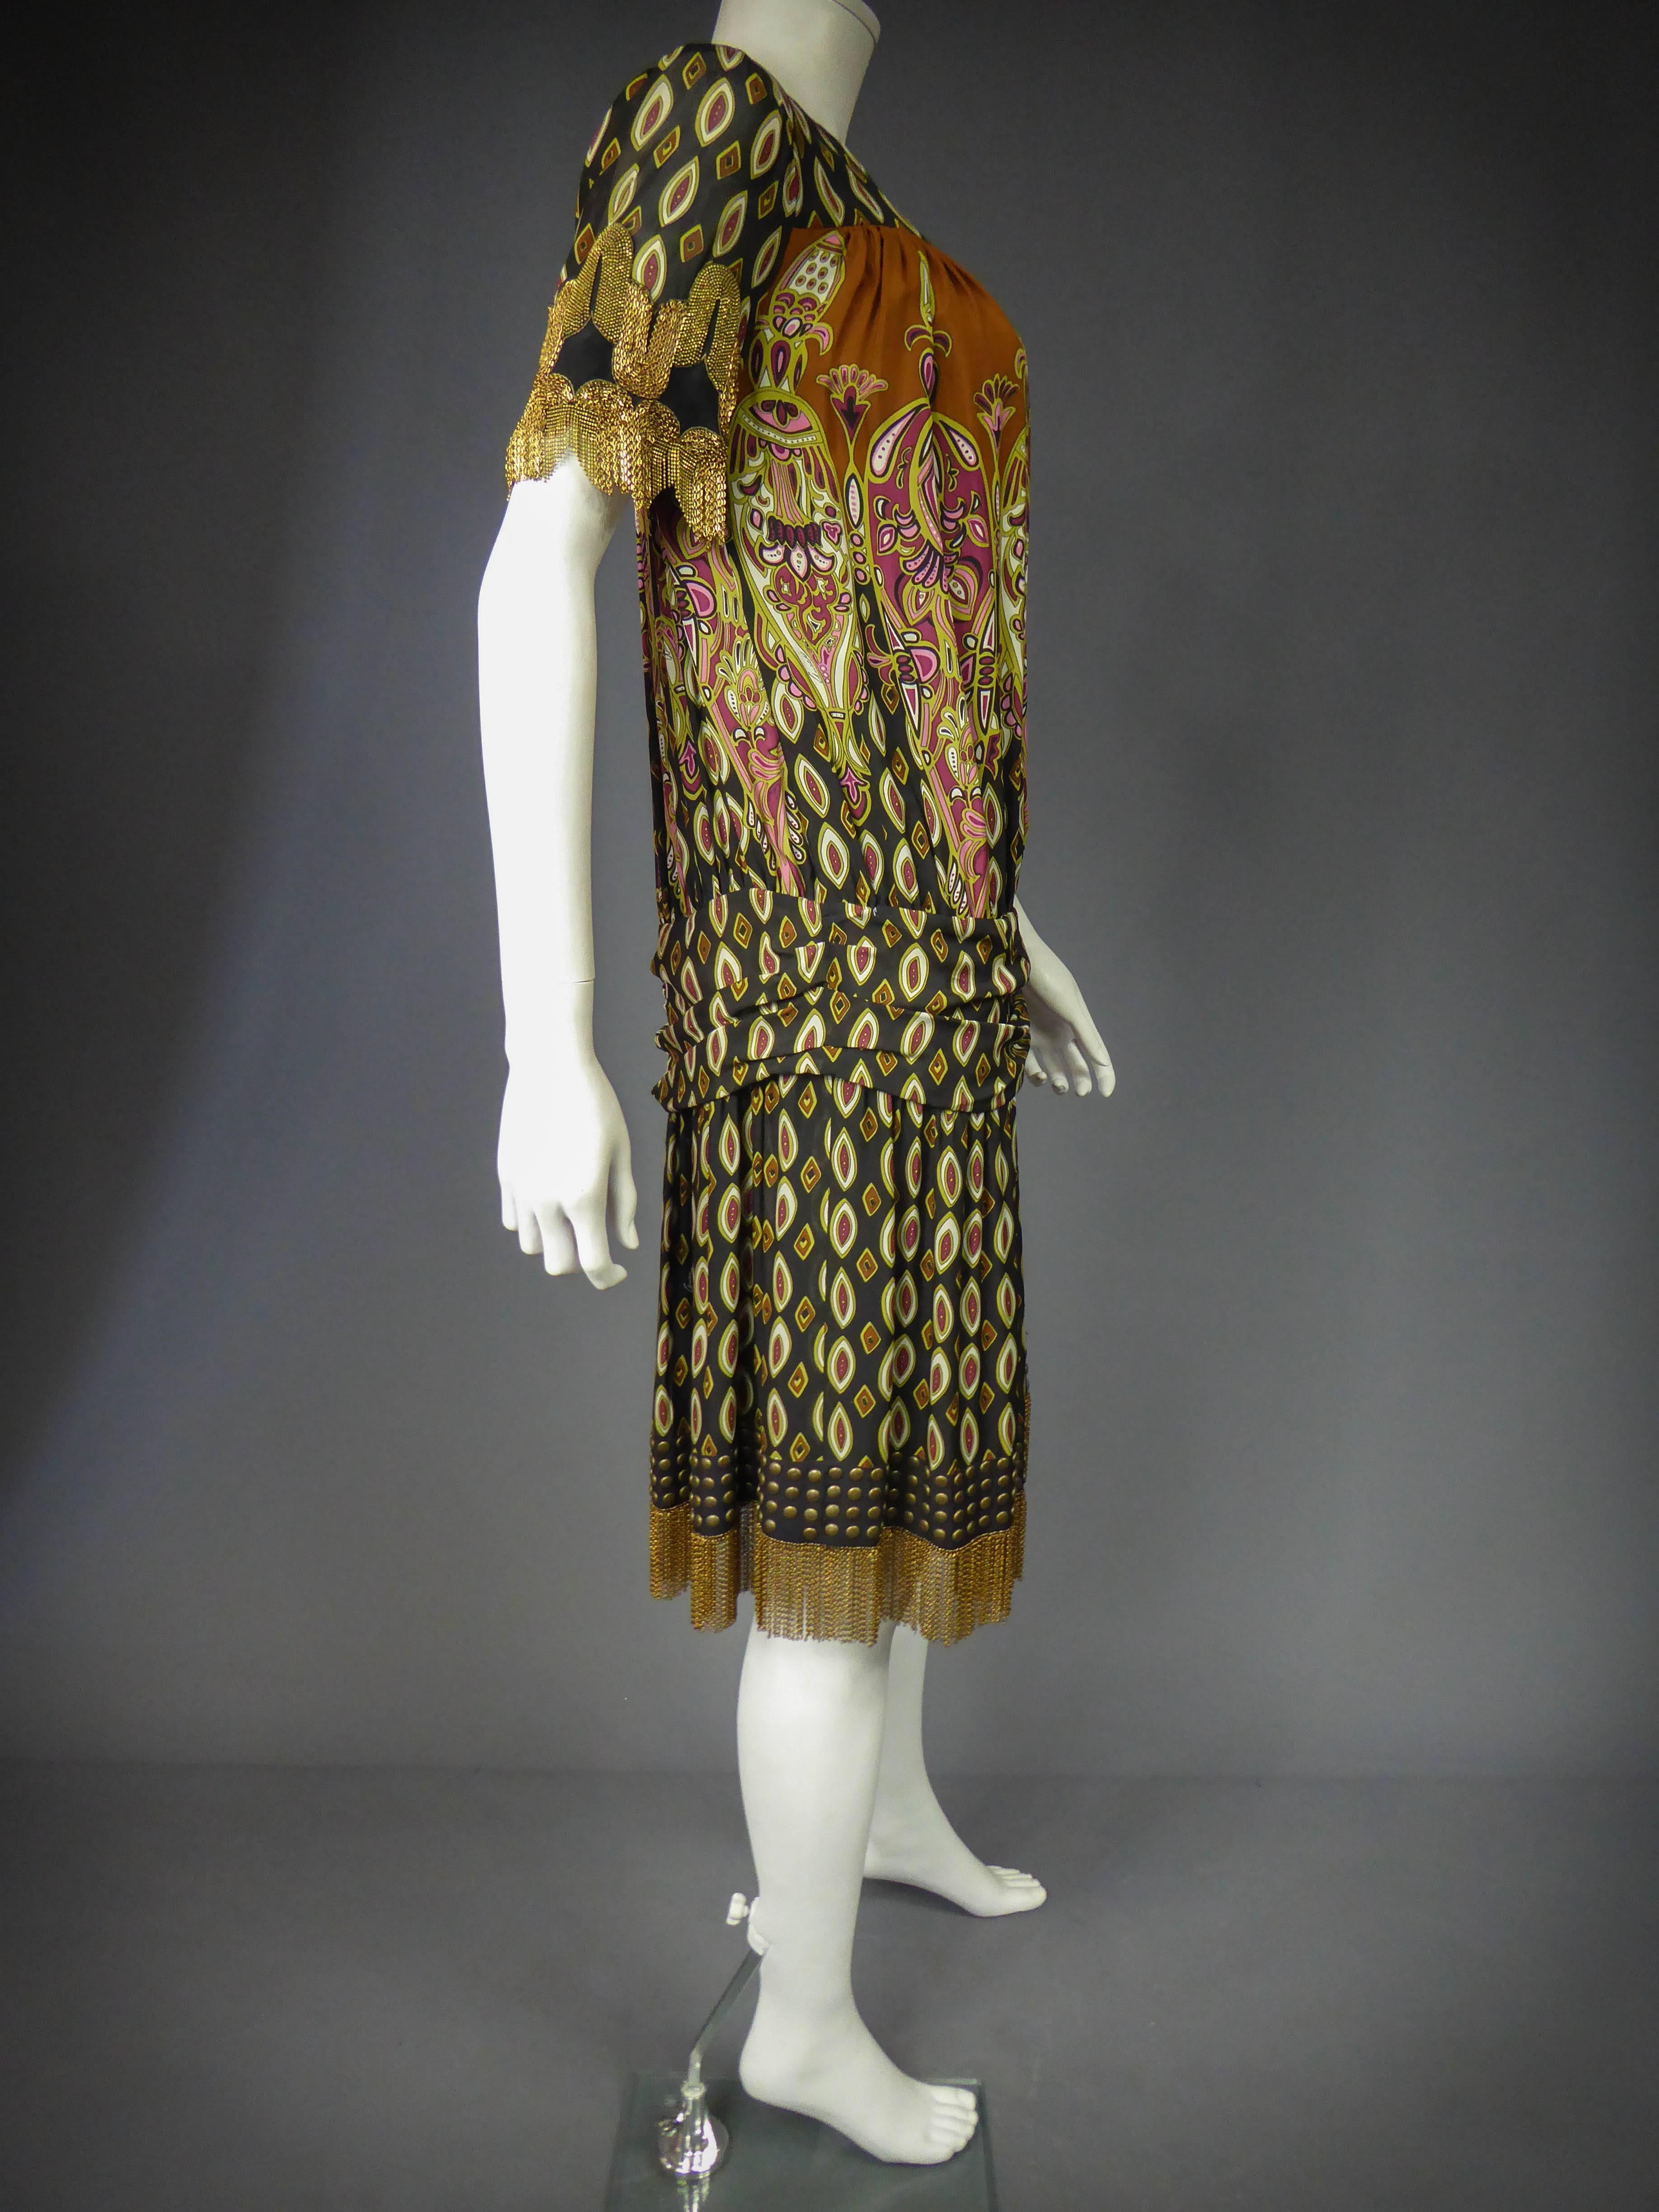 A Printed Silk Gucci Dress Fall / Winter 2008 - 2009 For Sale 2